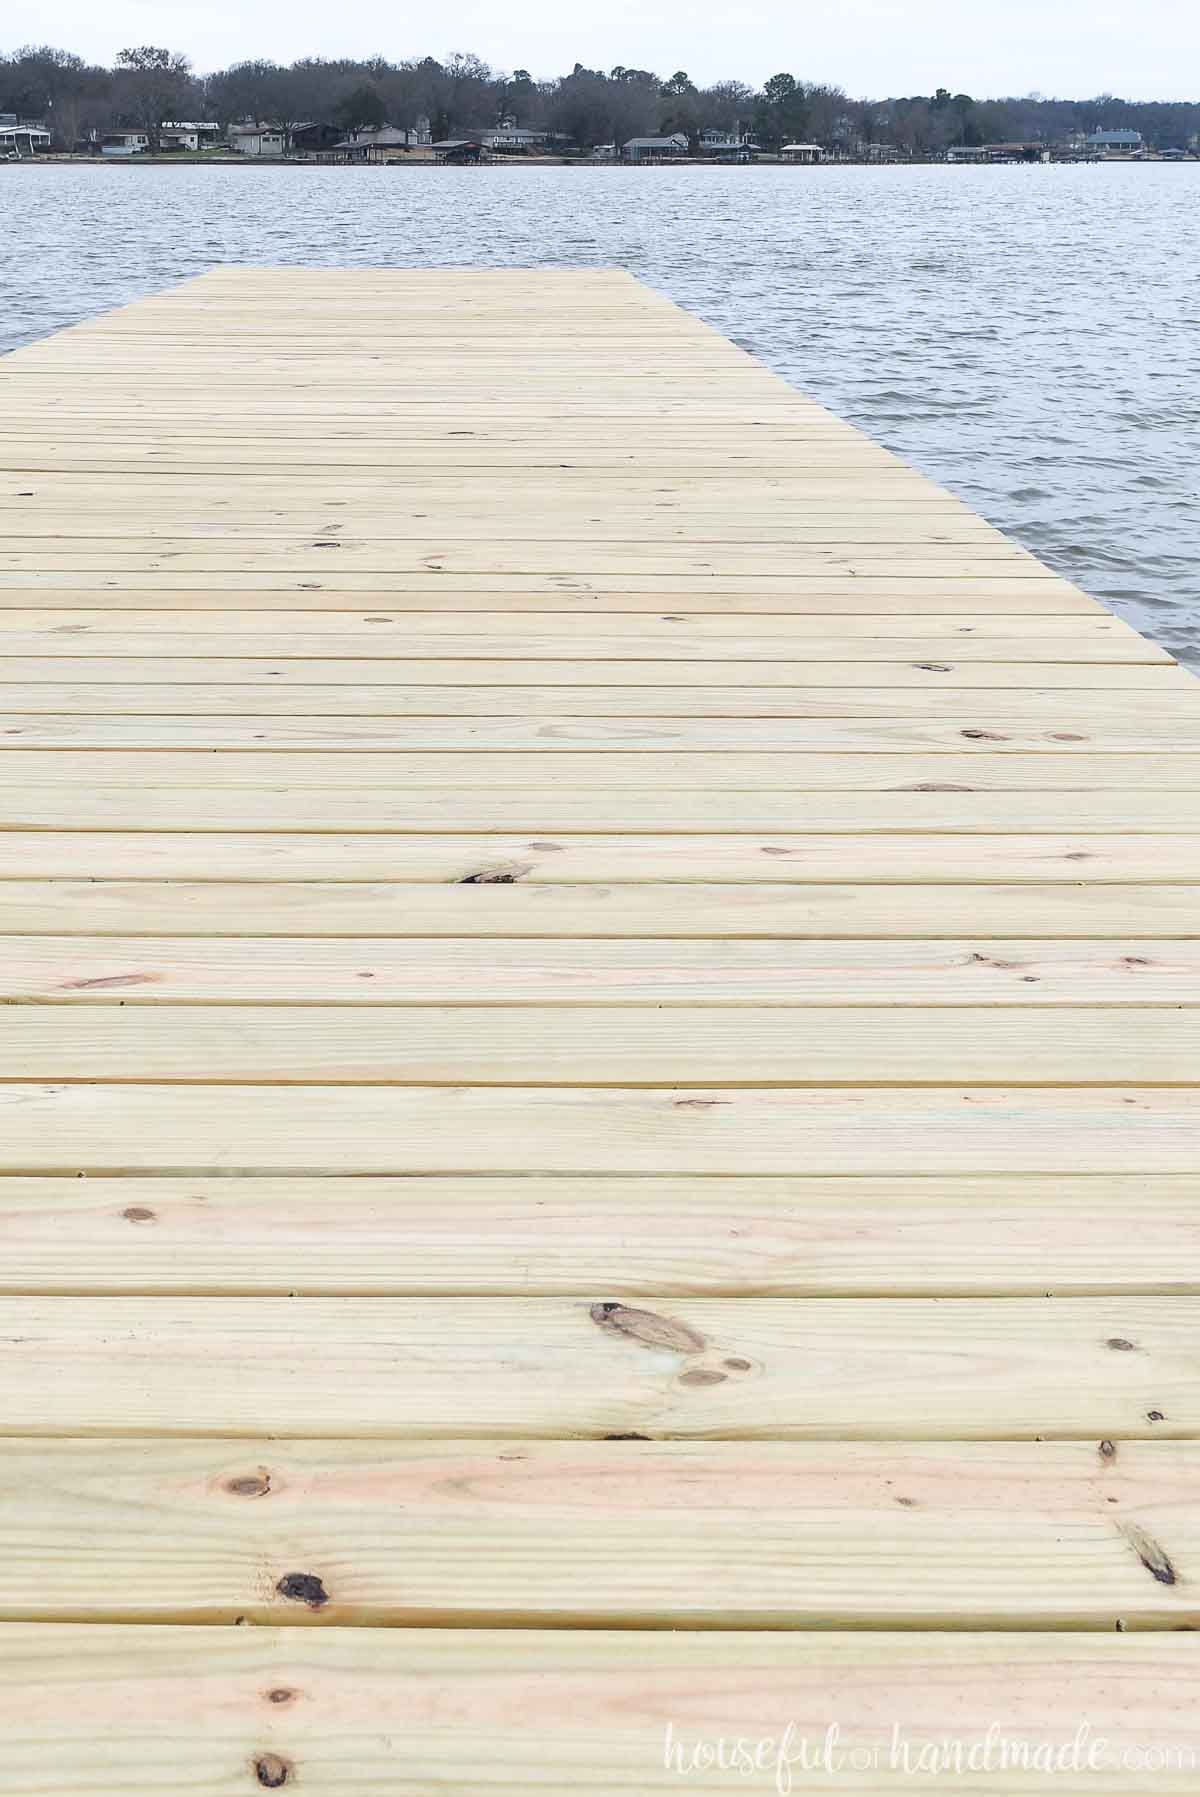 New pressure-treated deck boards on a dock with 1/4" spacing and hidden deck screws. 